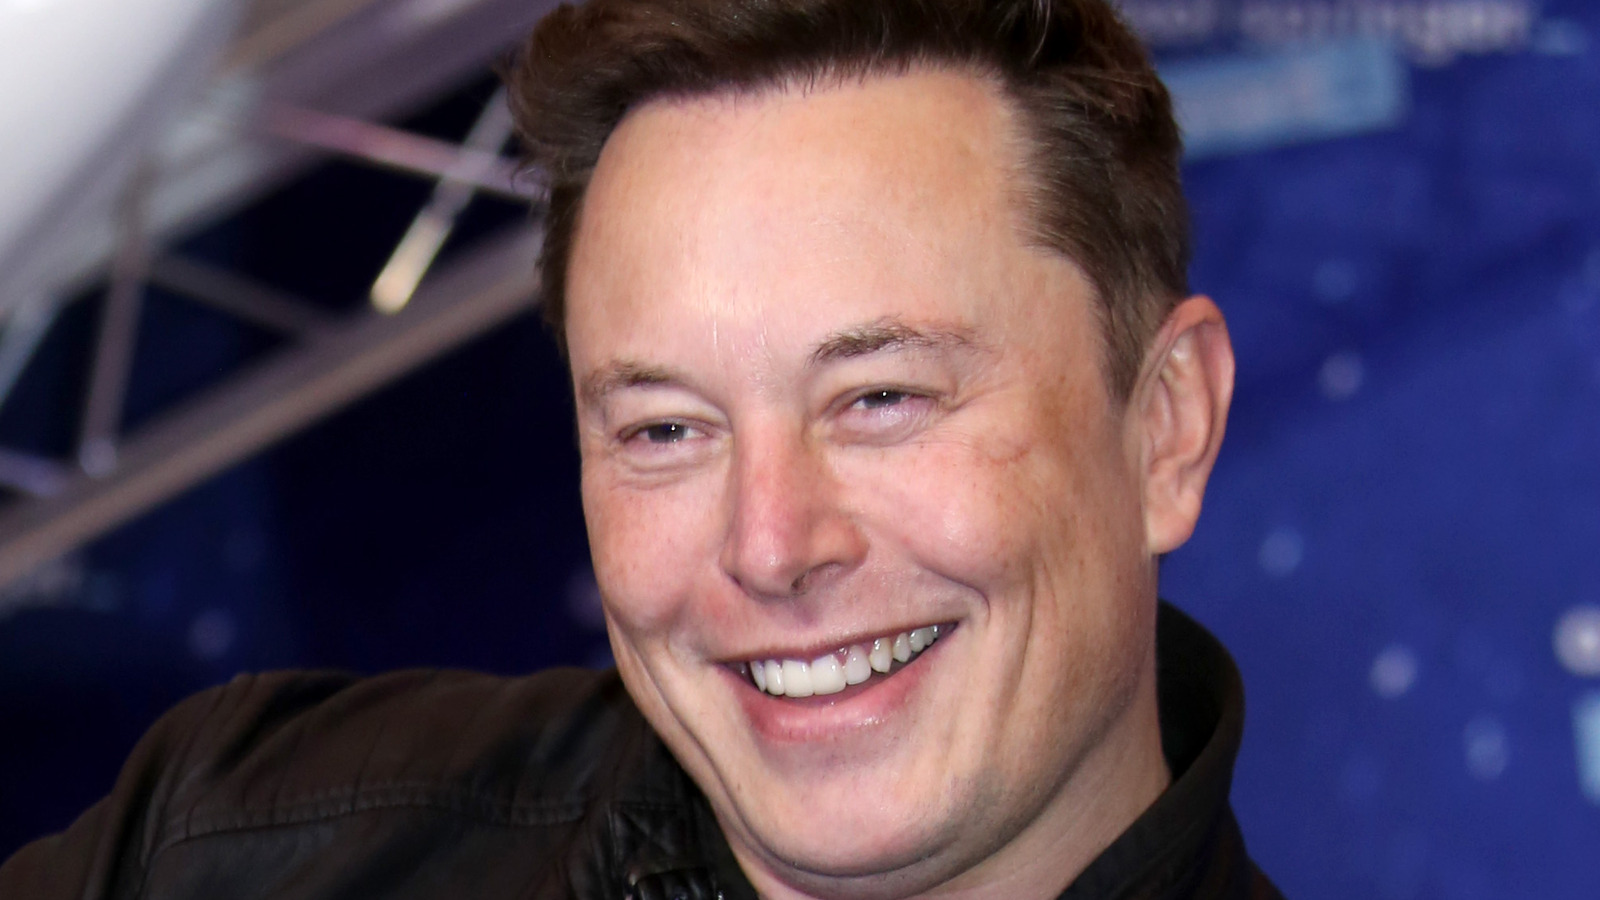 Elon Musk father shares dreams of musk in his childhood